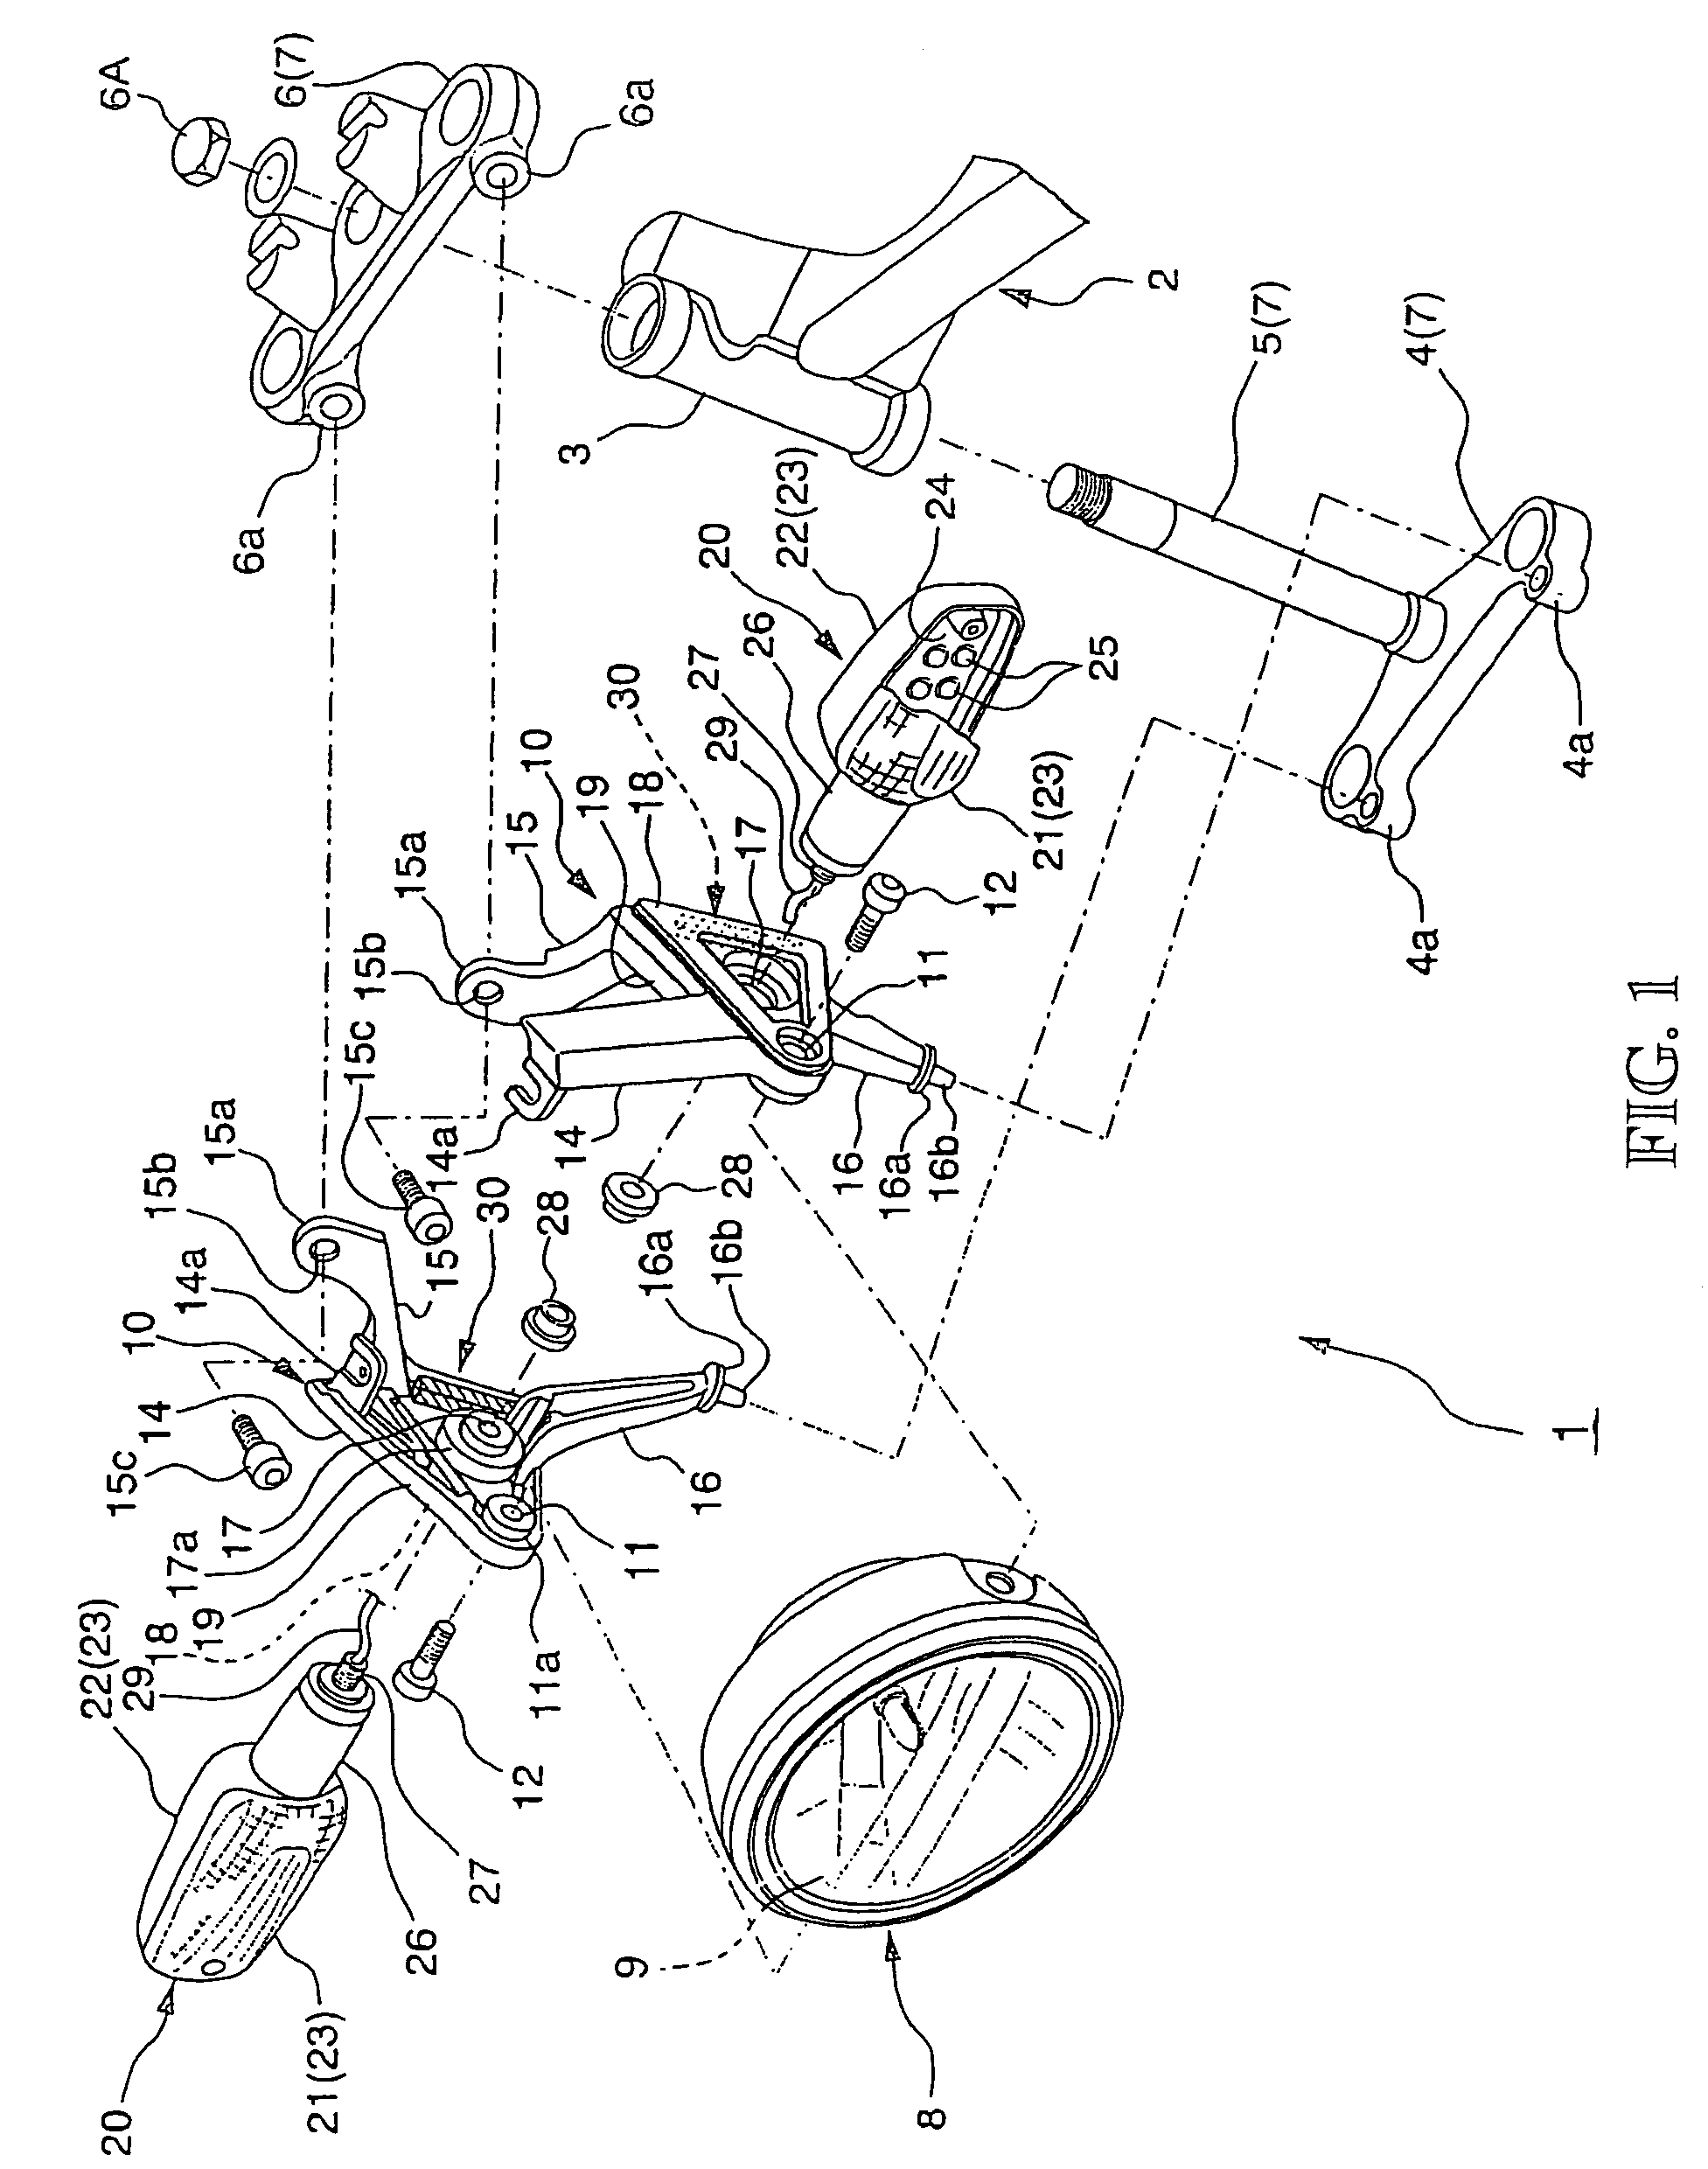 Lamp apparatus for vehicle